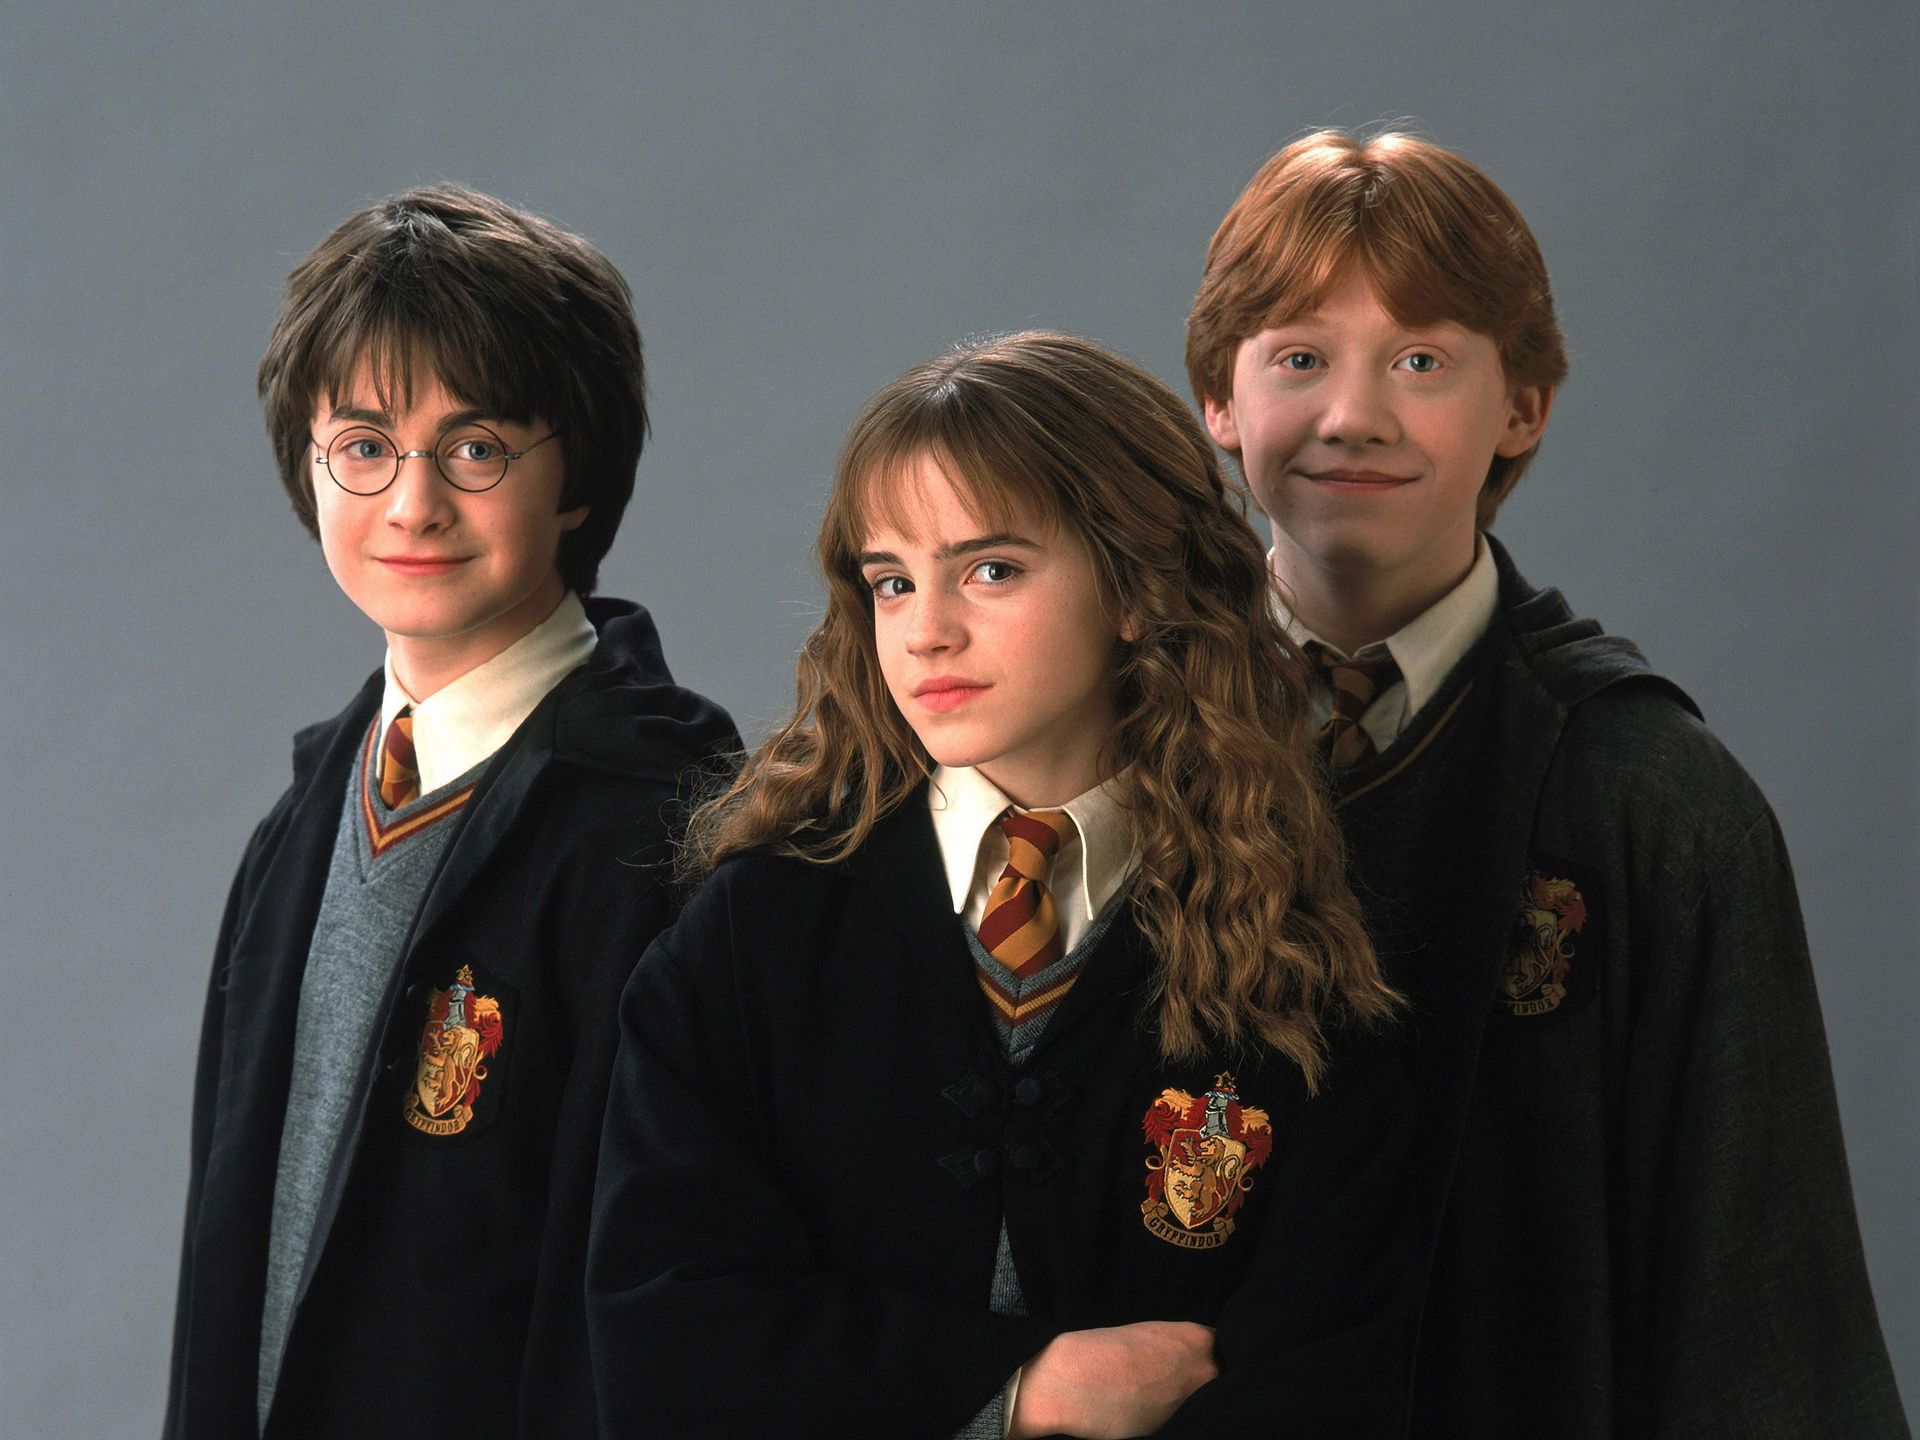 More Harry Potter movies are coming, but what is a 'Harry Potter